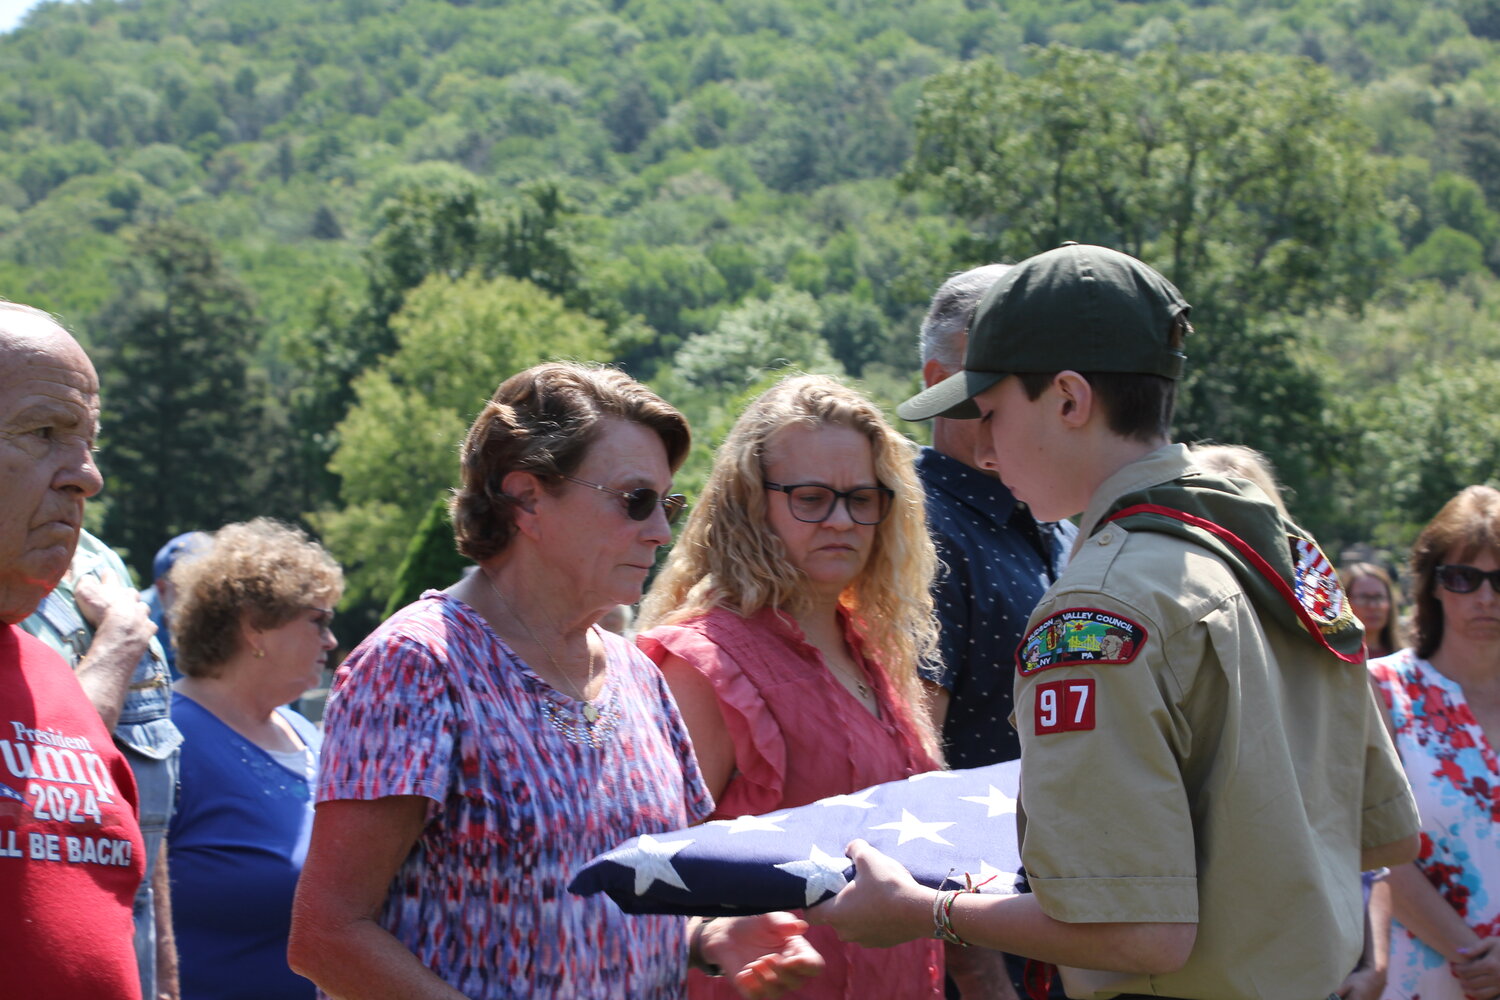 A member of Boy Scout Troop 97 accepts the flag honoring U.S. Army Veteran Herb Akerley from his wife Kathleen.